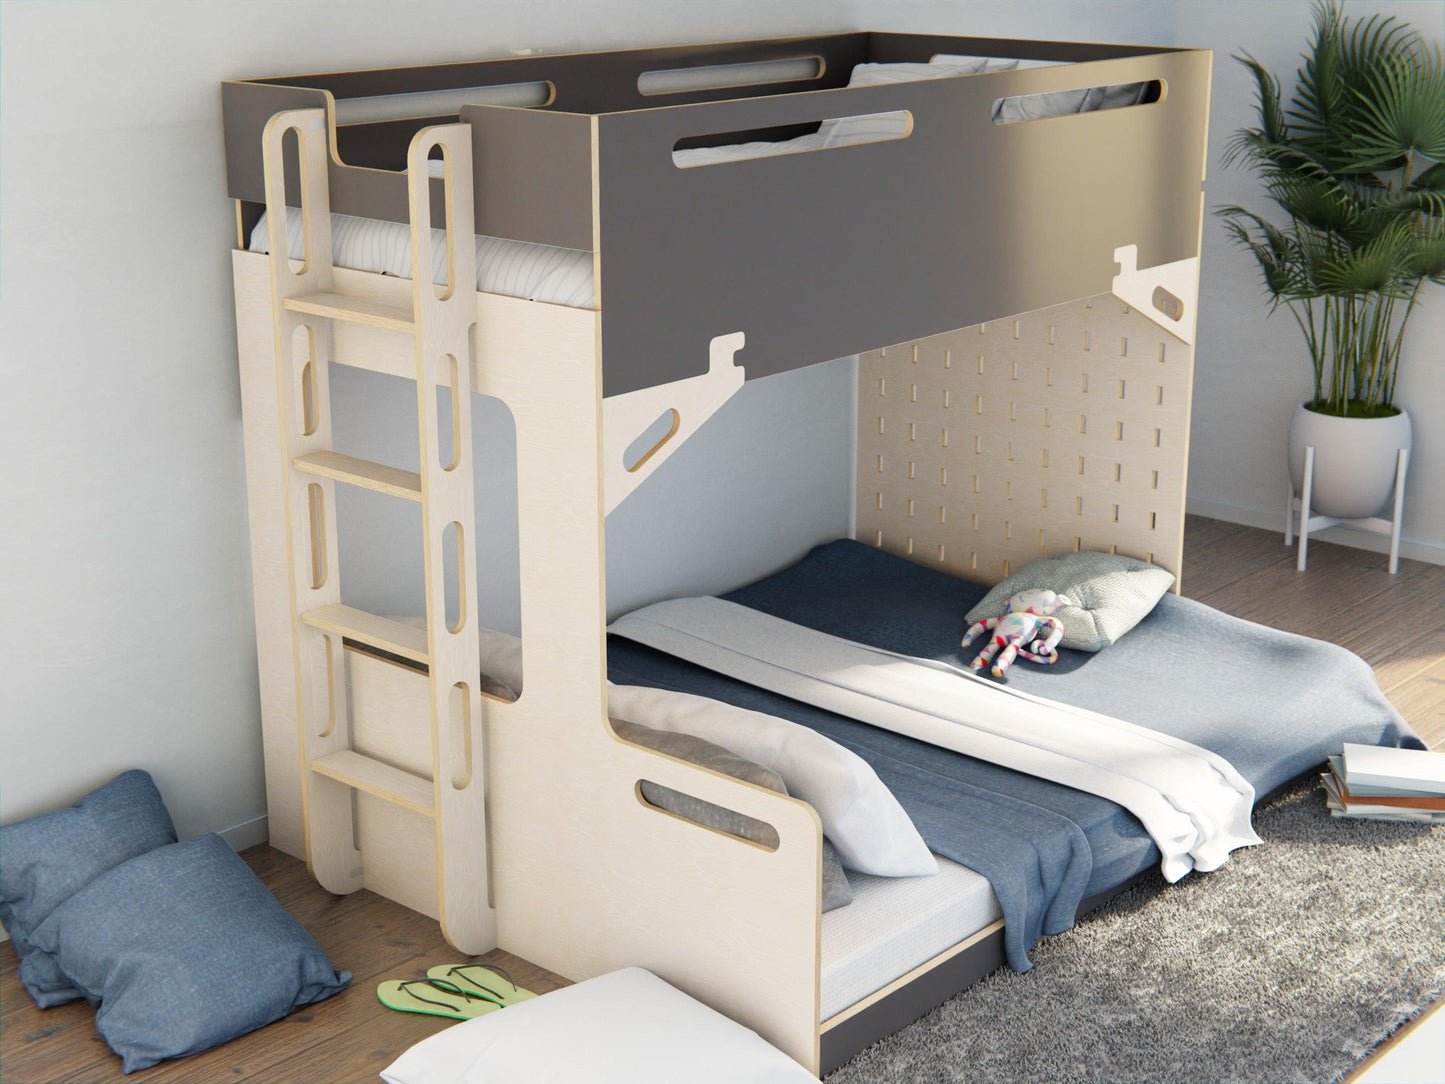 Enjoy our versatile plywood family bunk beds in black.